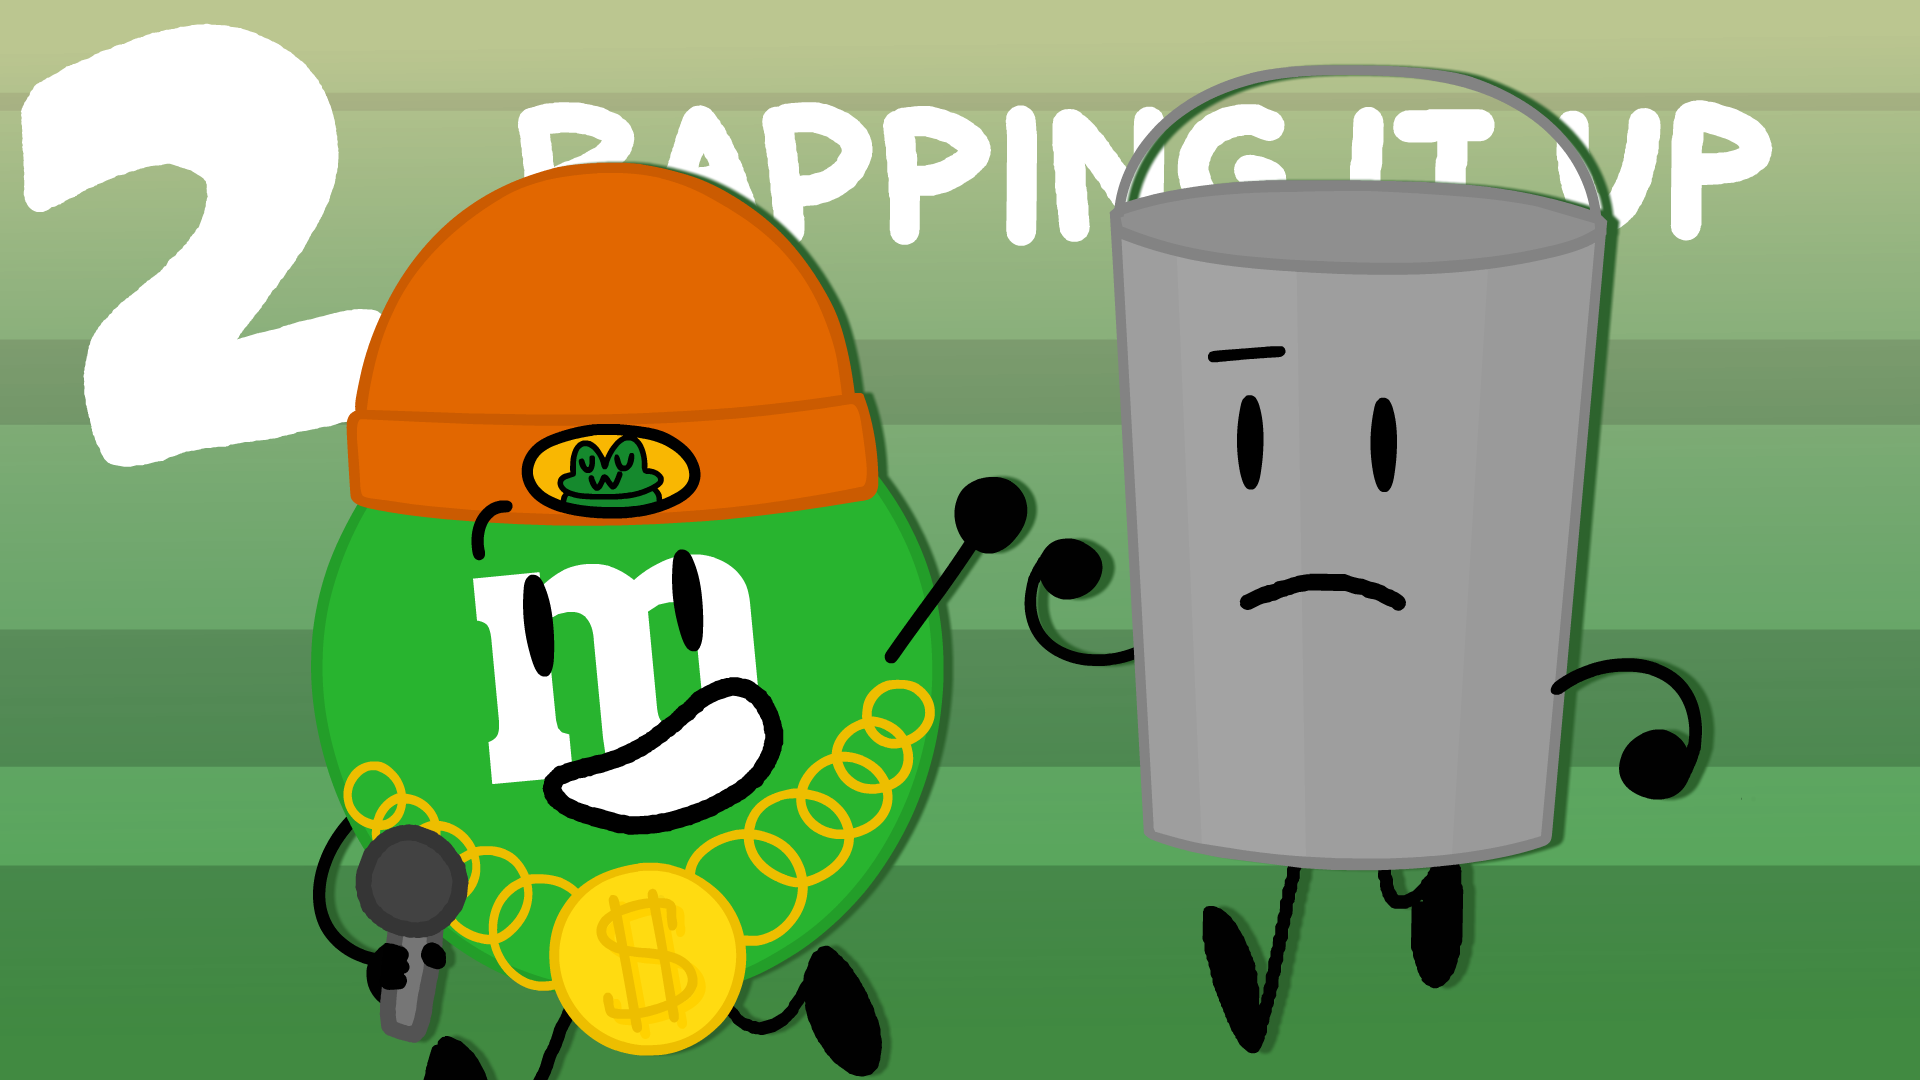 But it'll help motivate us dawg!M&M Rapping it Up is the second ep...